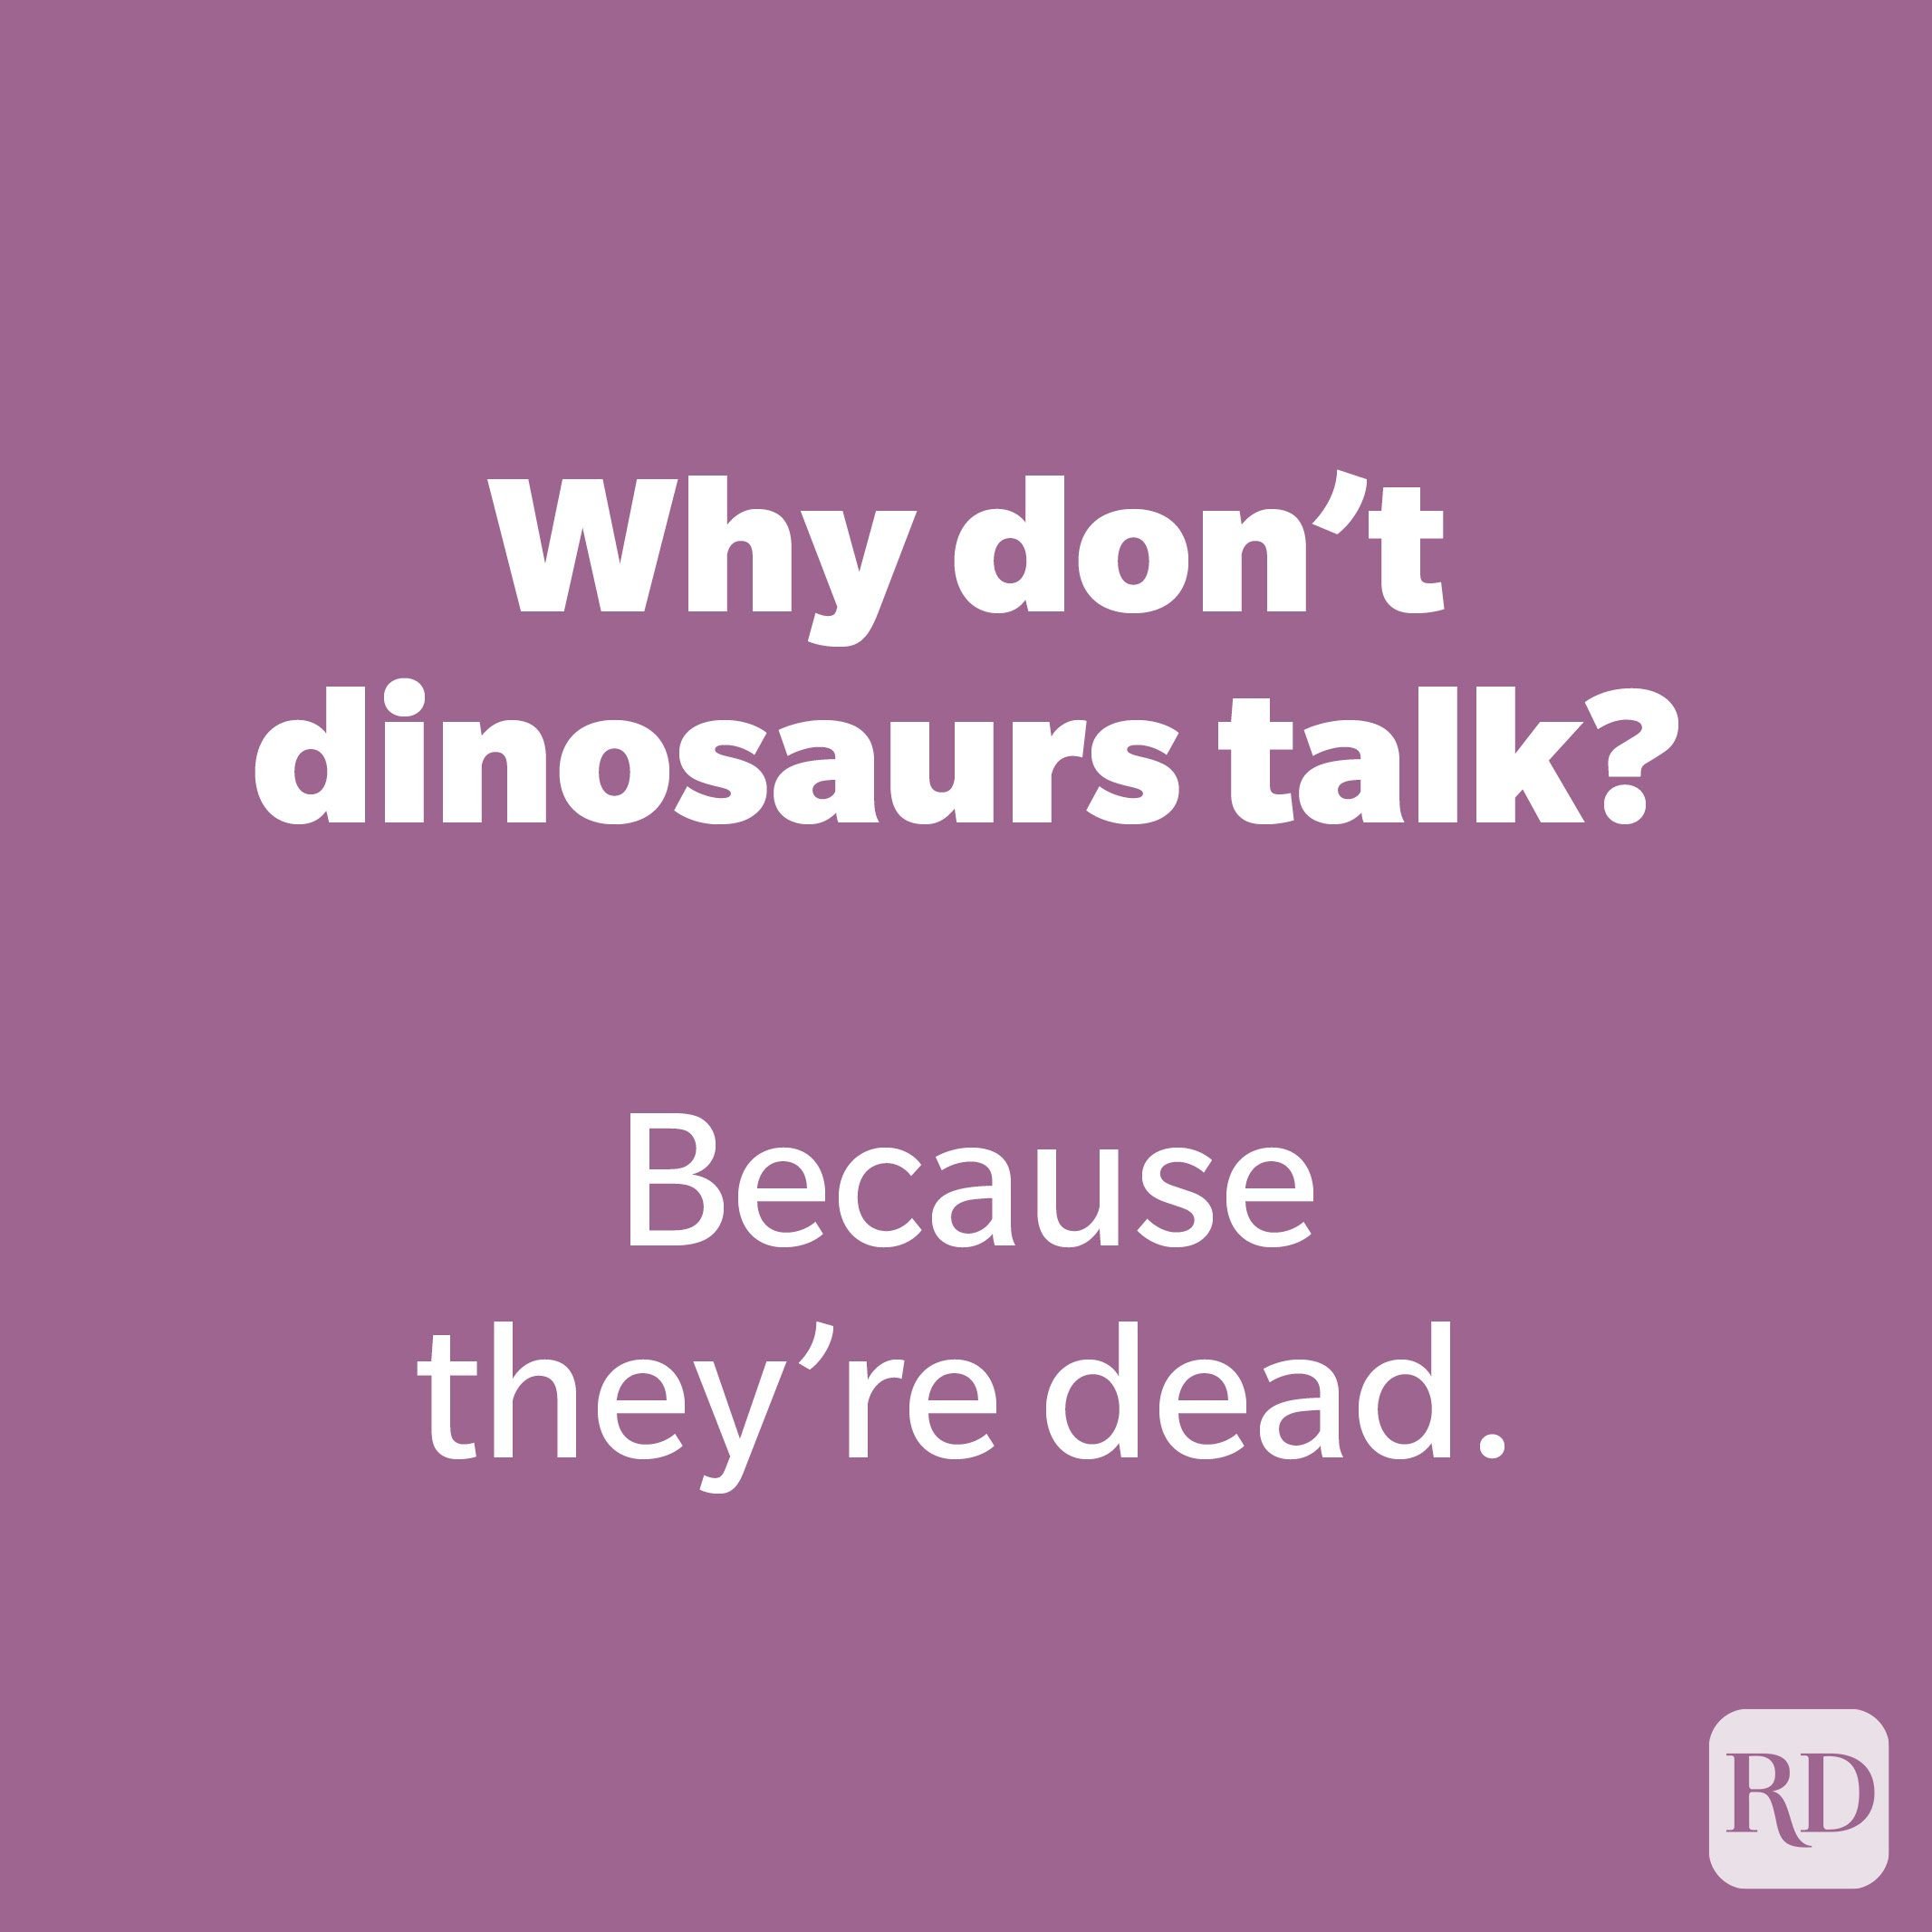 Why don’t dinosaurs talk?